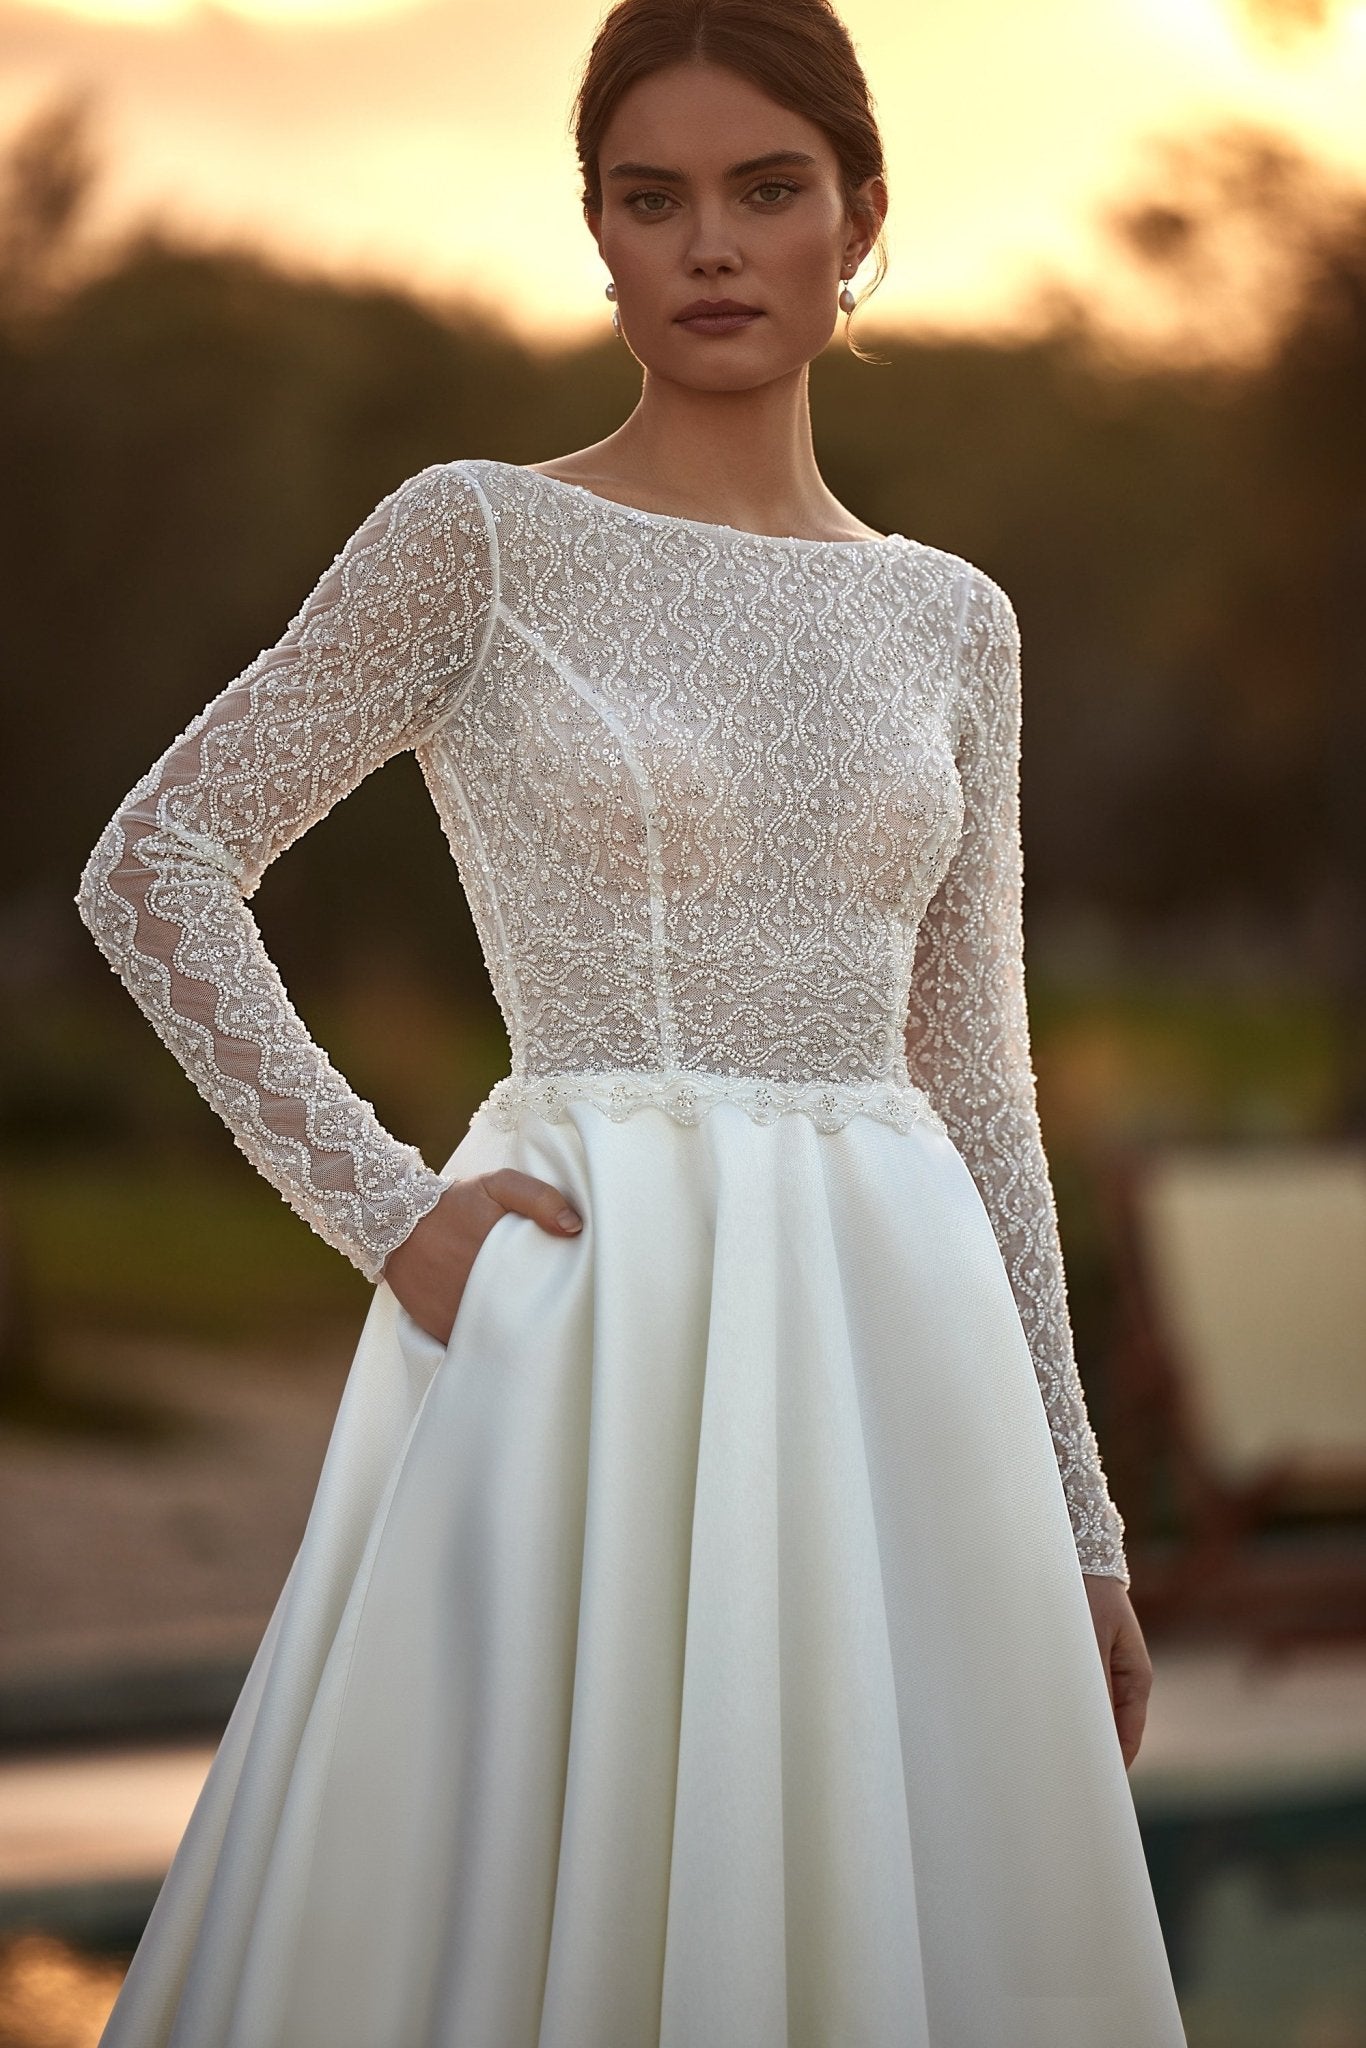 Elegant Modern Long Sleeve Wedding Gown with Lace Details and Beaded Corset – Plus Size Available - WonderlandByLilian